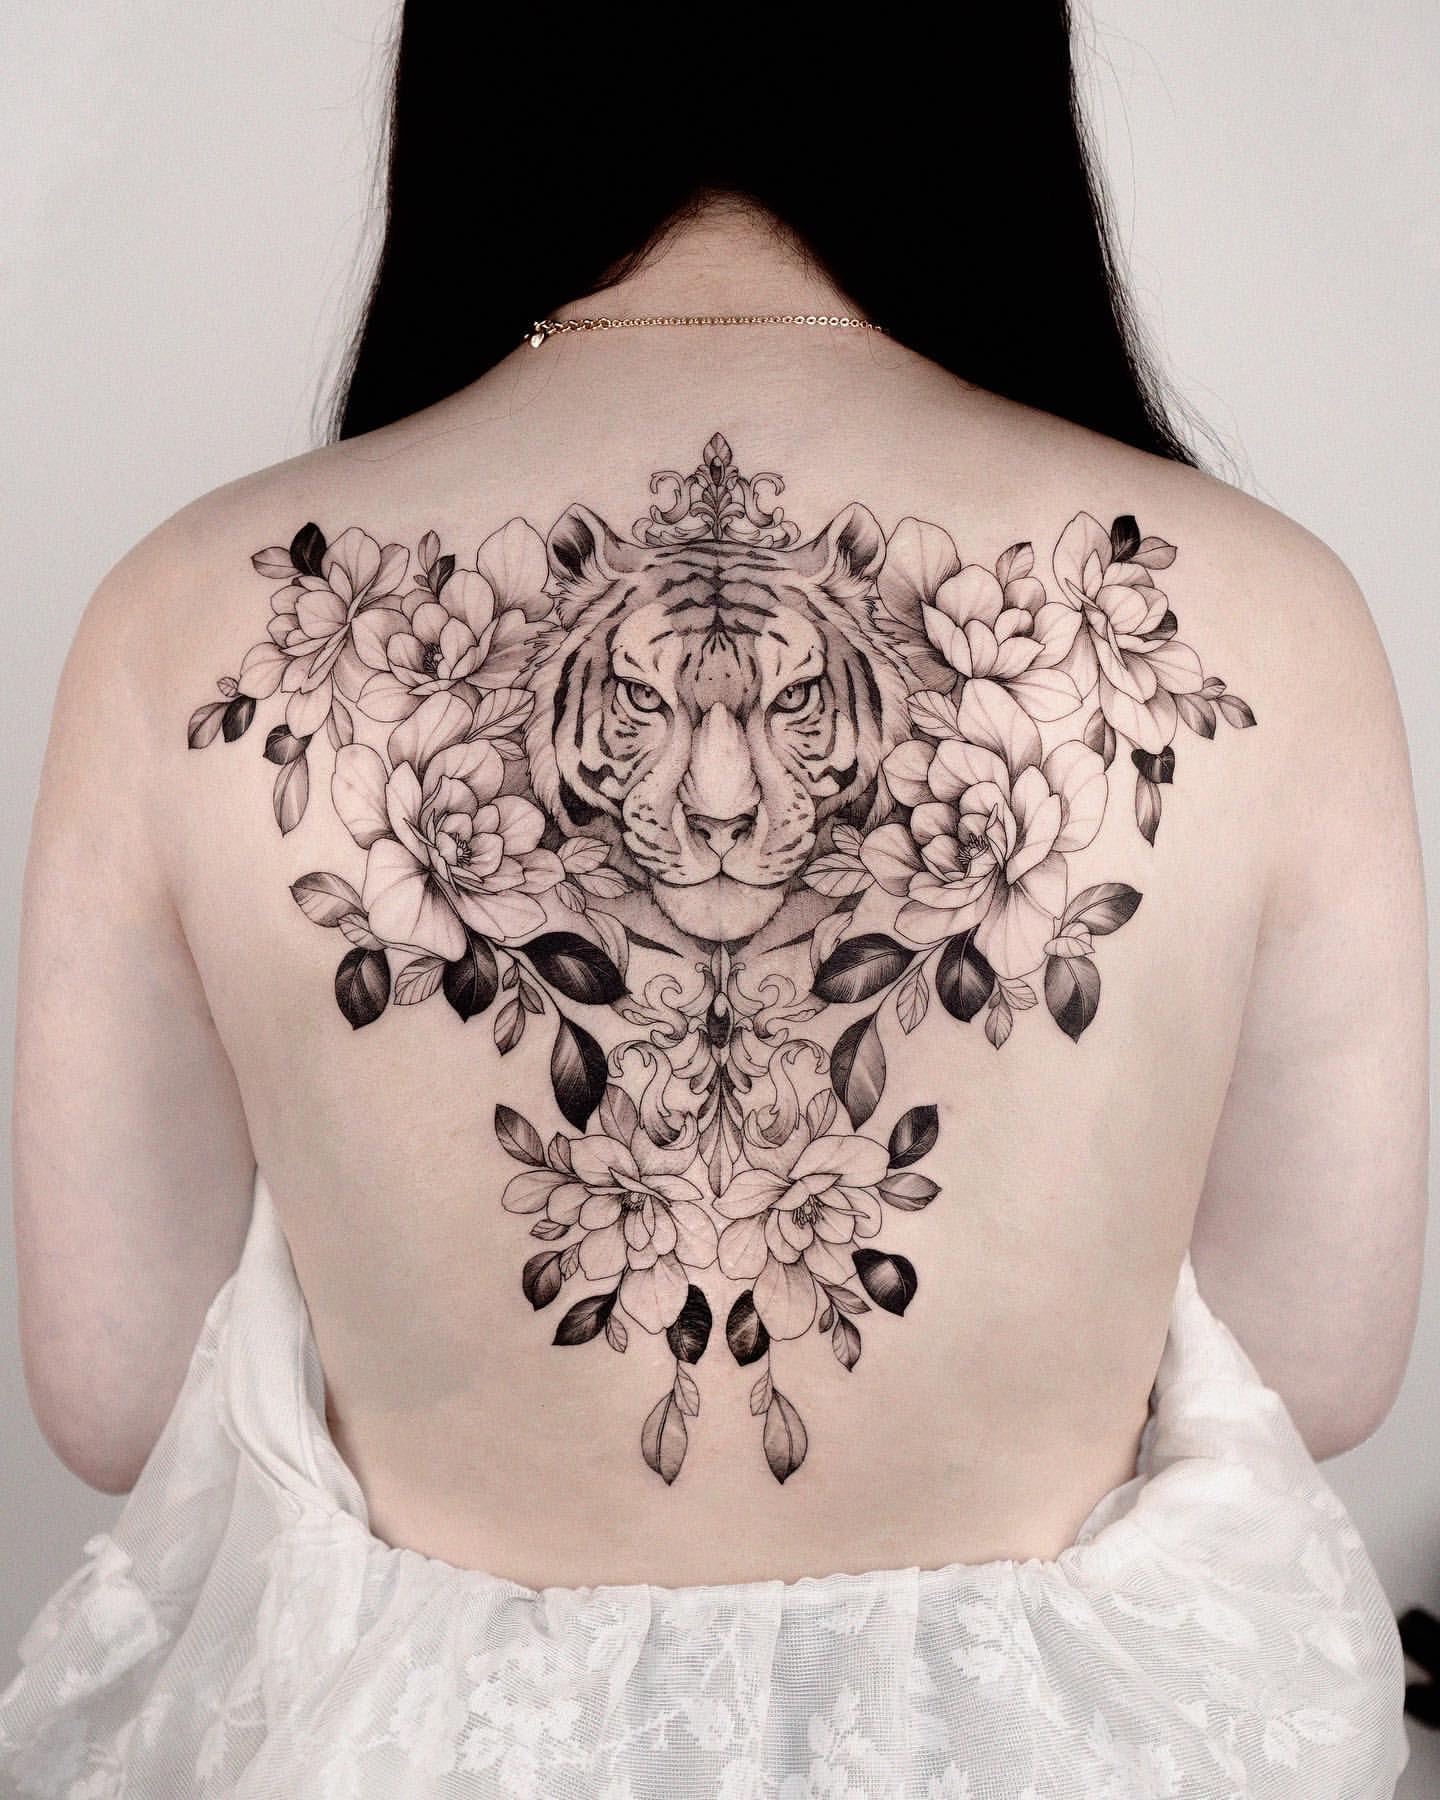 Chest Tattoos Ideas for Women 50